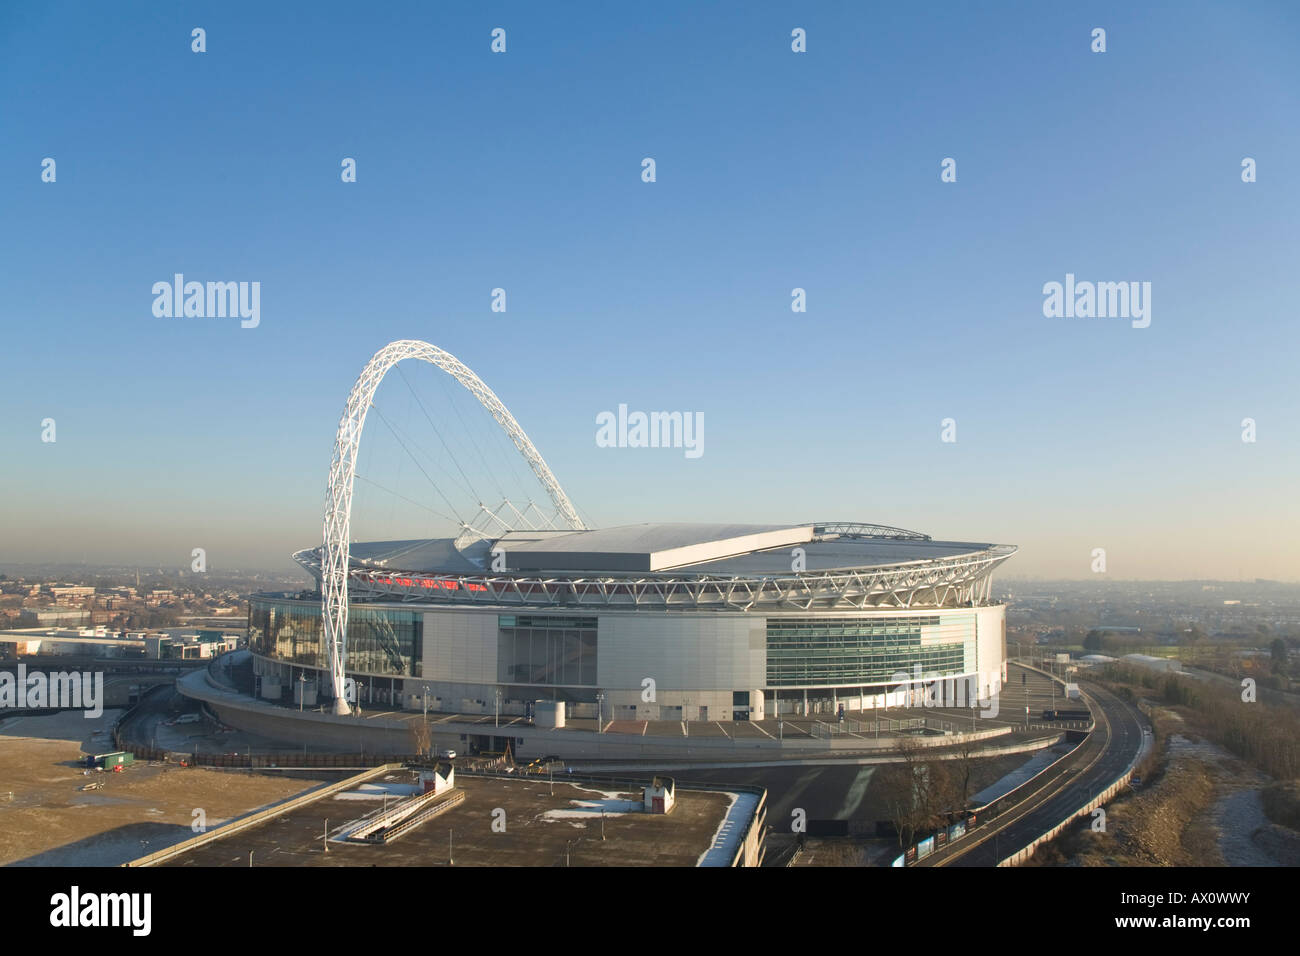 England, London, Brent, Wembley, New Wembley Stadium, The archway is the World's longest unsupported roof structure Stock Photo